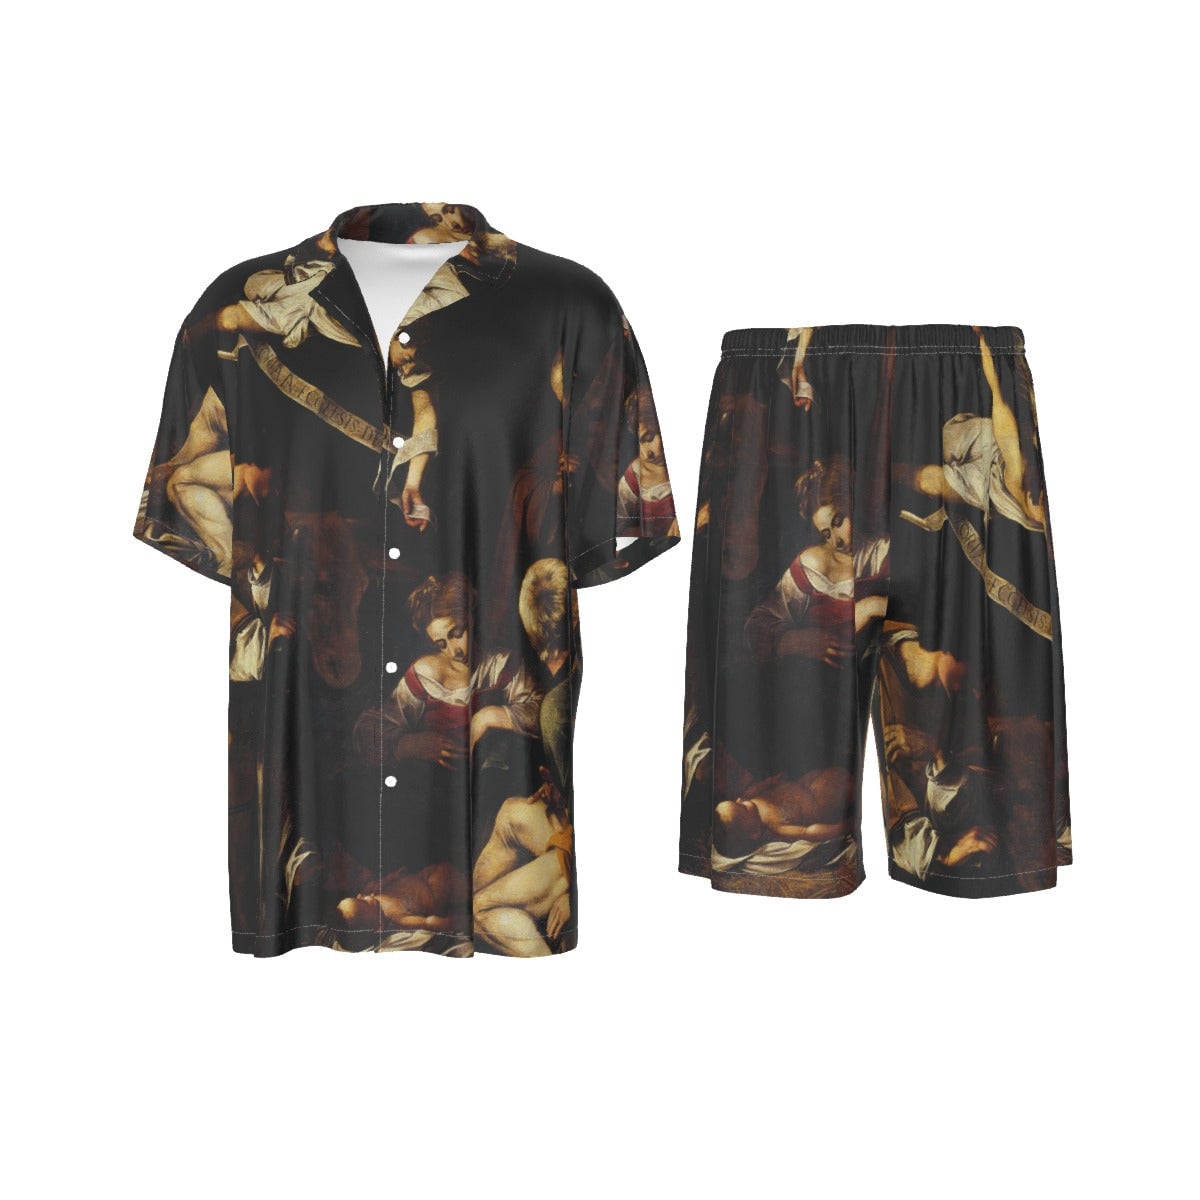 Nativity with St Francis and St Lawrence by Caravaggio Art Silk Shirt Suit Set